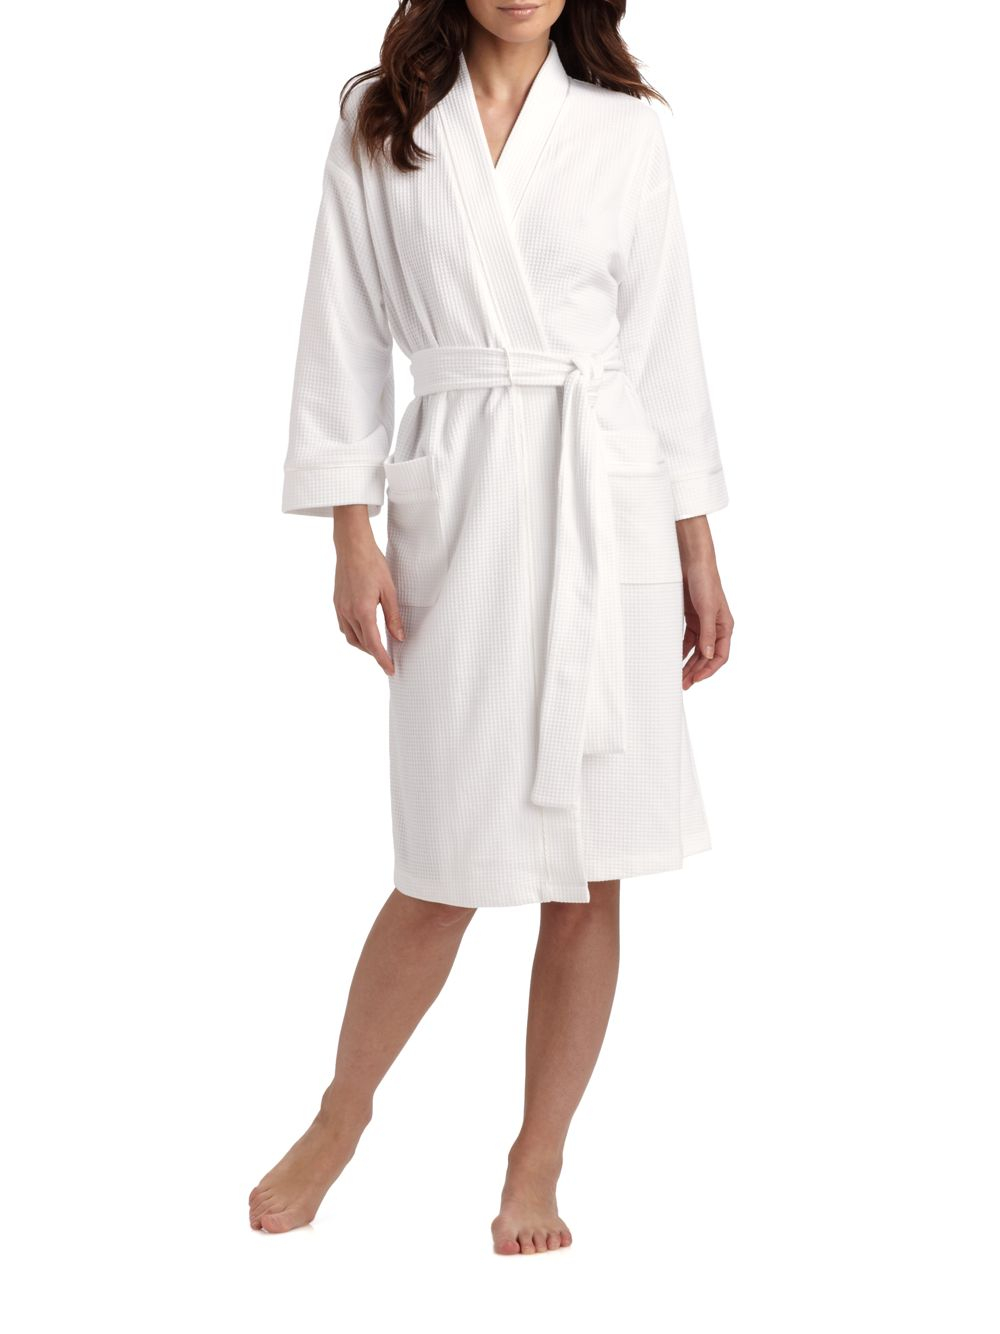 Cottonista Waffle Knit Short Robe in White | Lyst